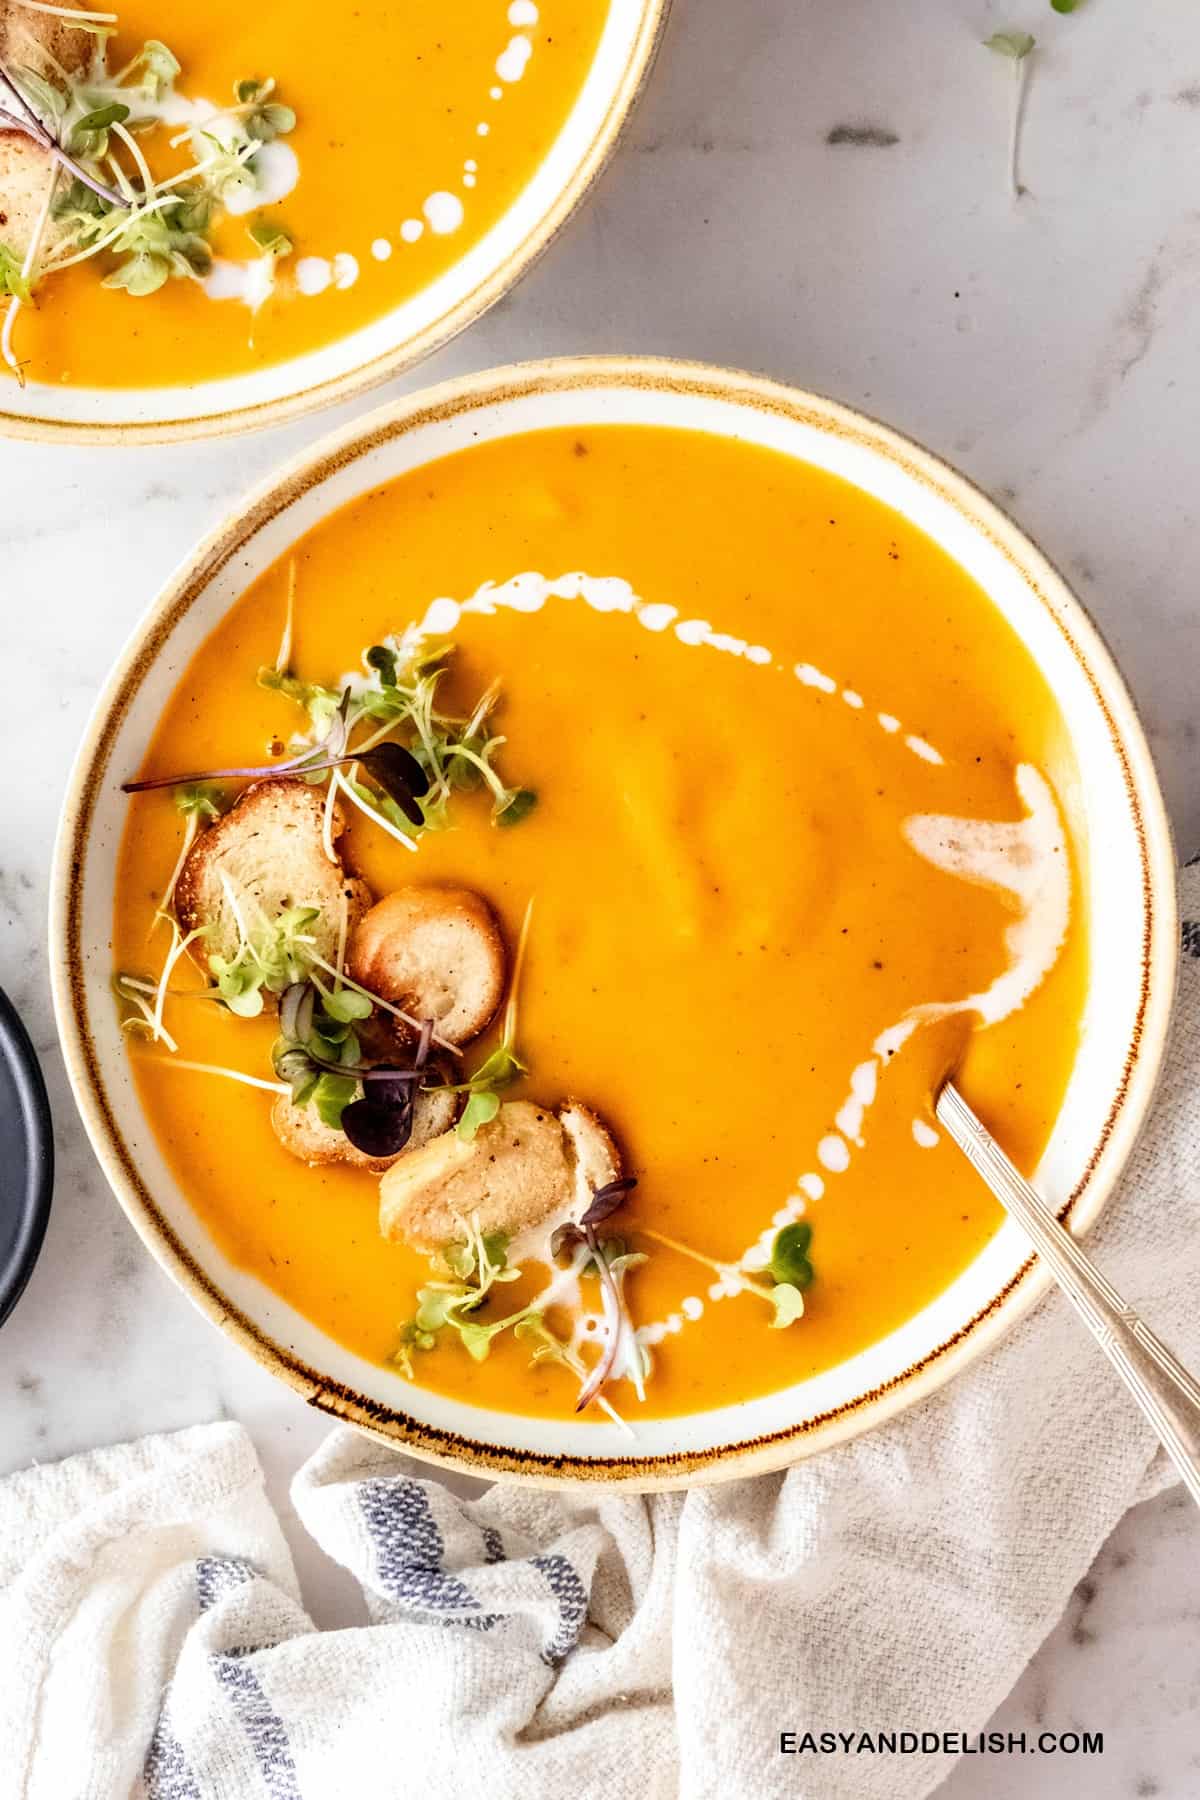 two bowls of creamy sweet potato soup garnished with herbs and croutons